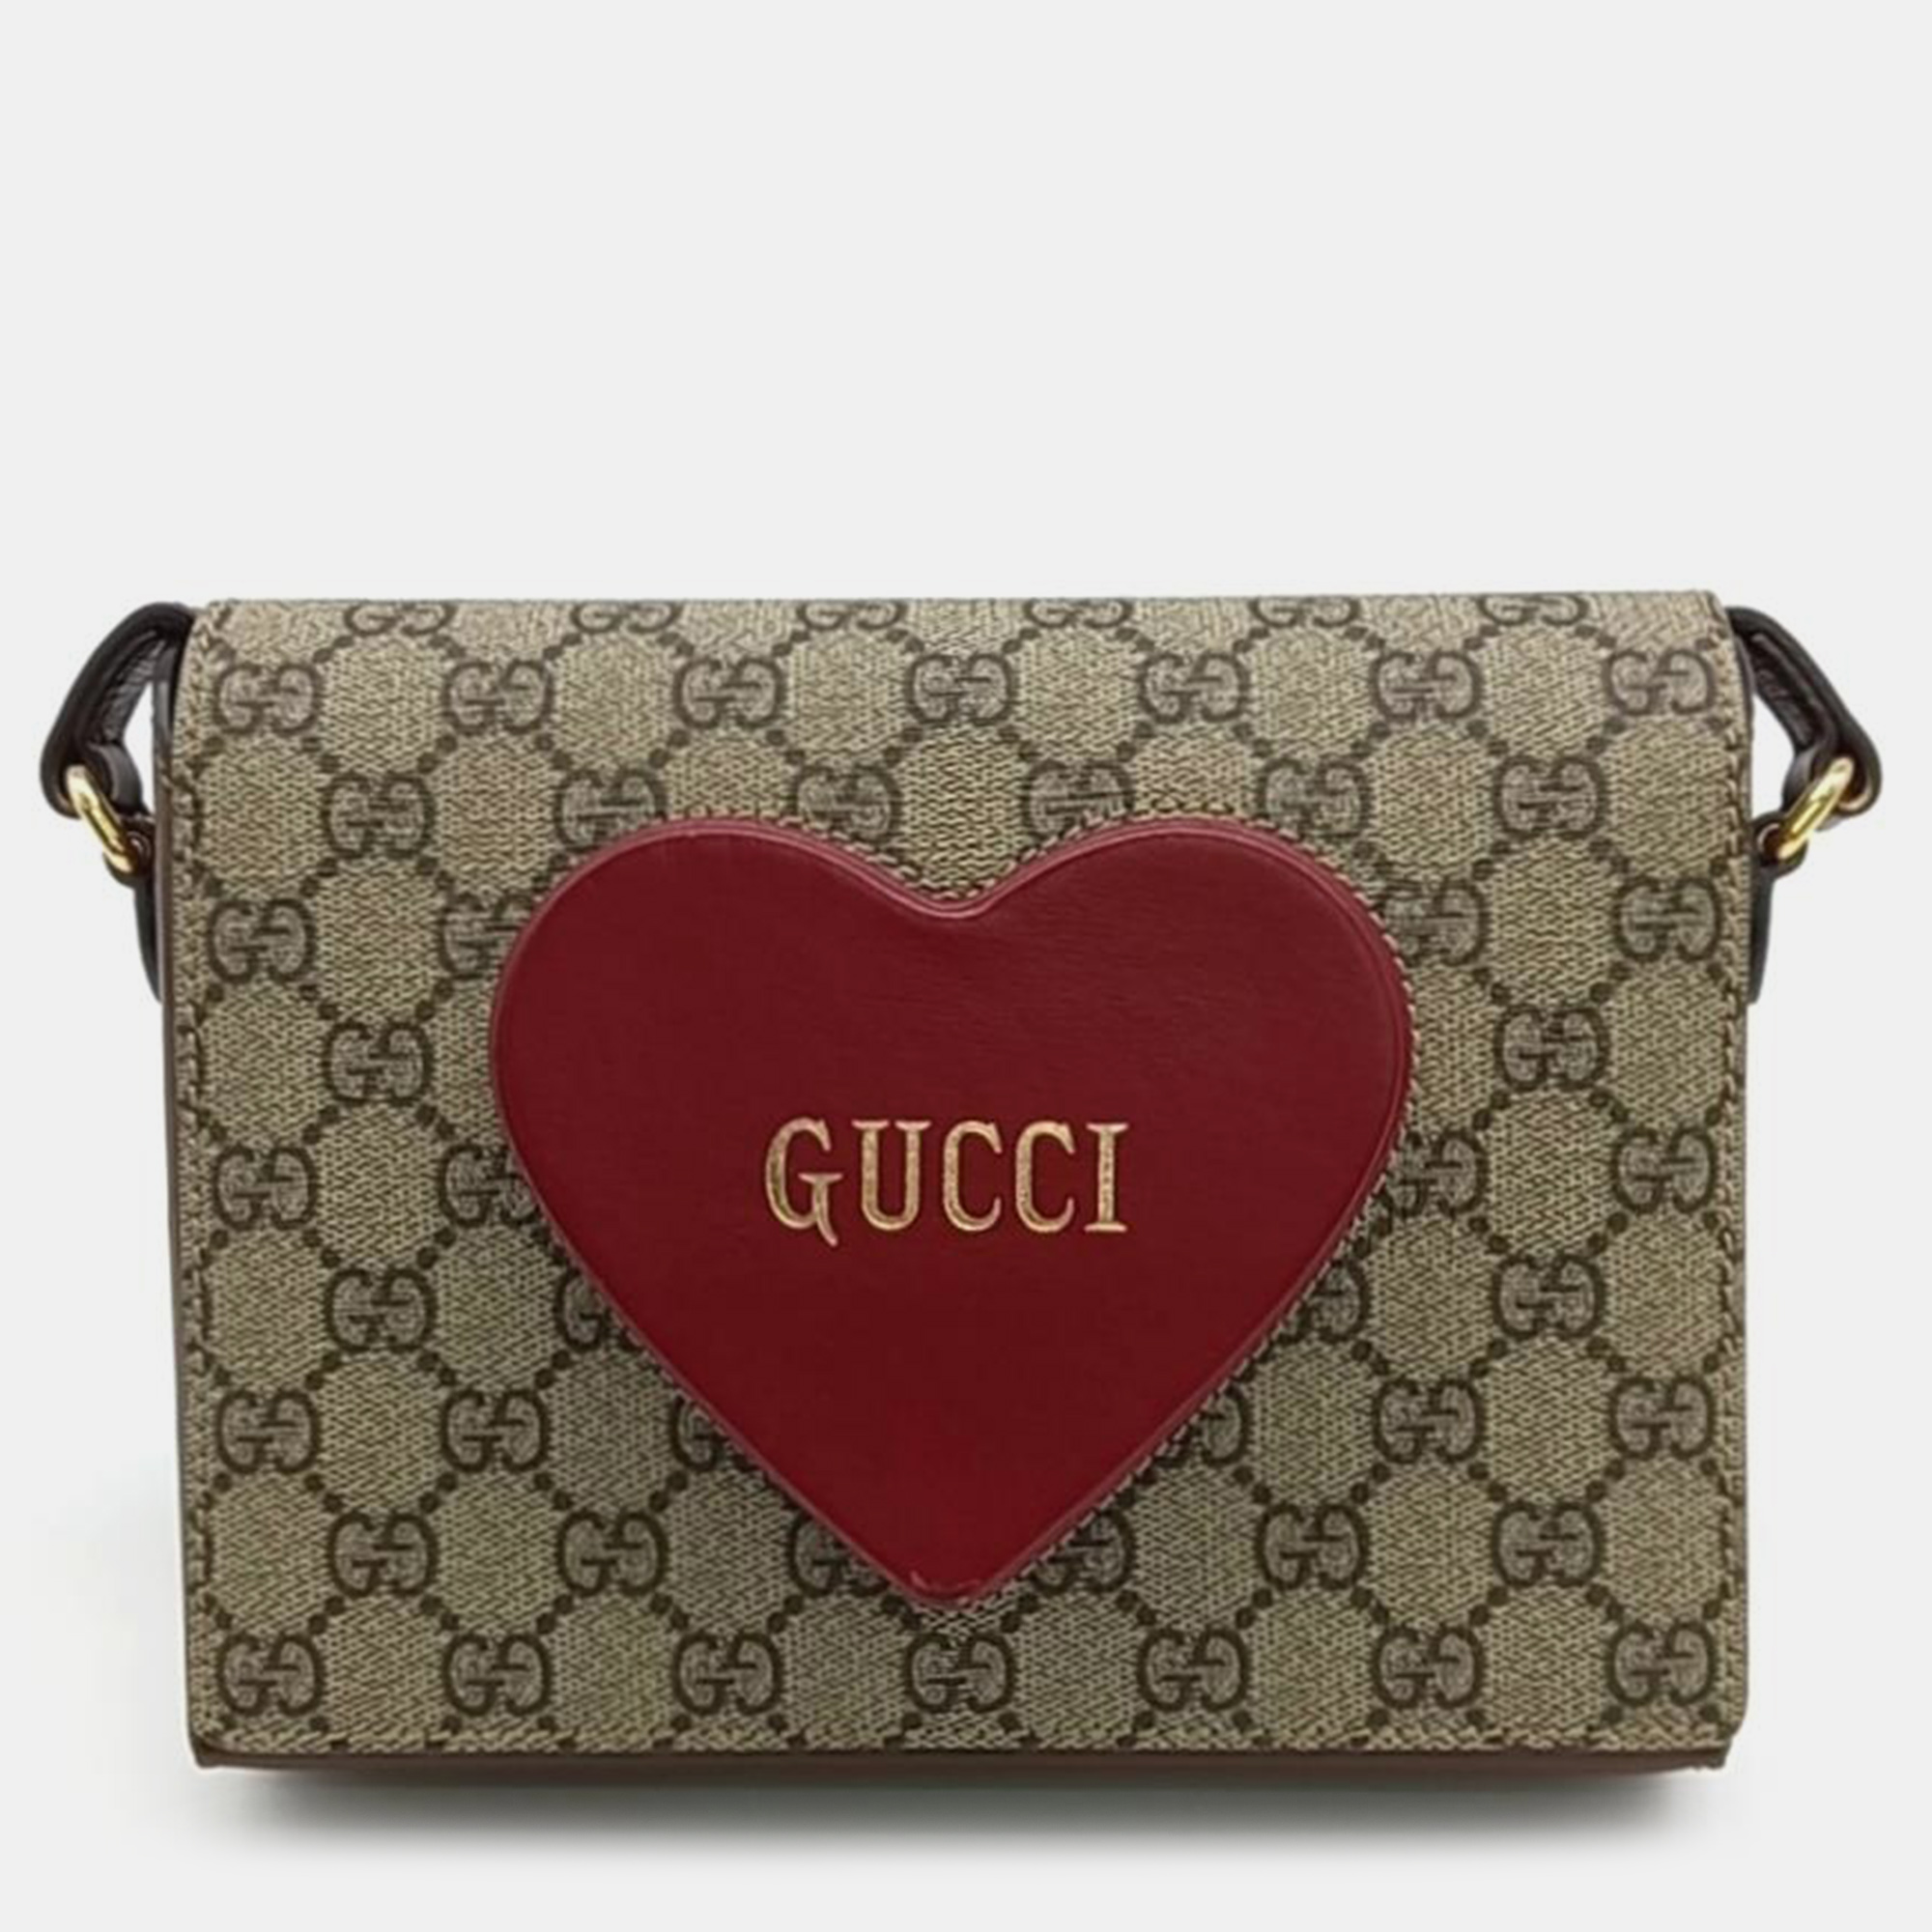 Crafted with precision this Gucci shoulder bag combines luxurious materials with impeccable design ensuring you make a sophisticated statement wherever you go. Invest in it today.